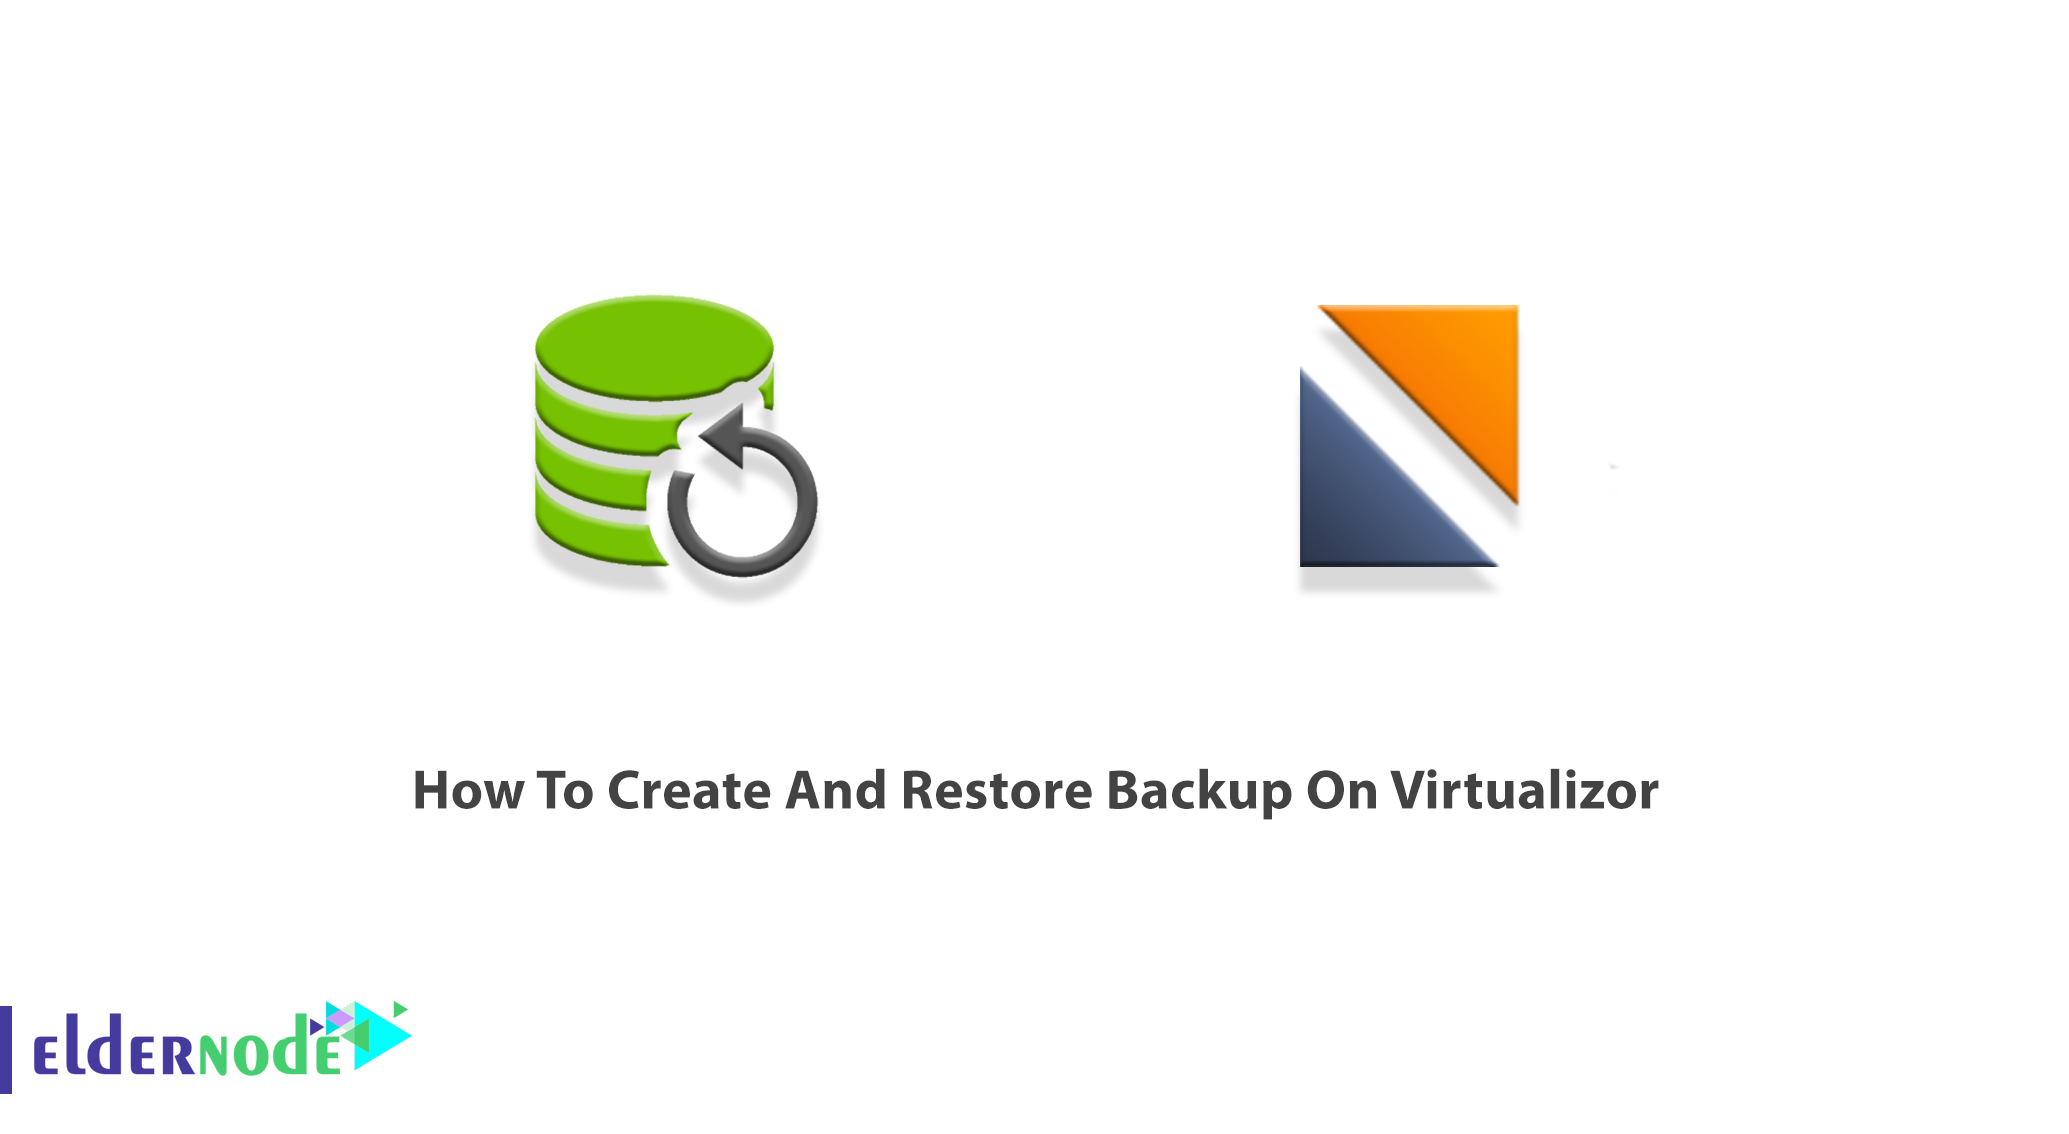 How To Create And Restore Backup On Virtualizor